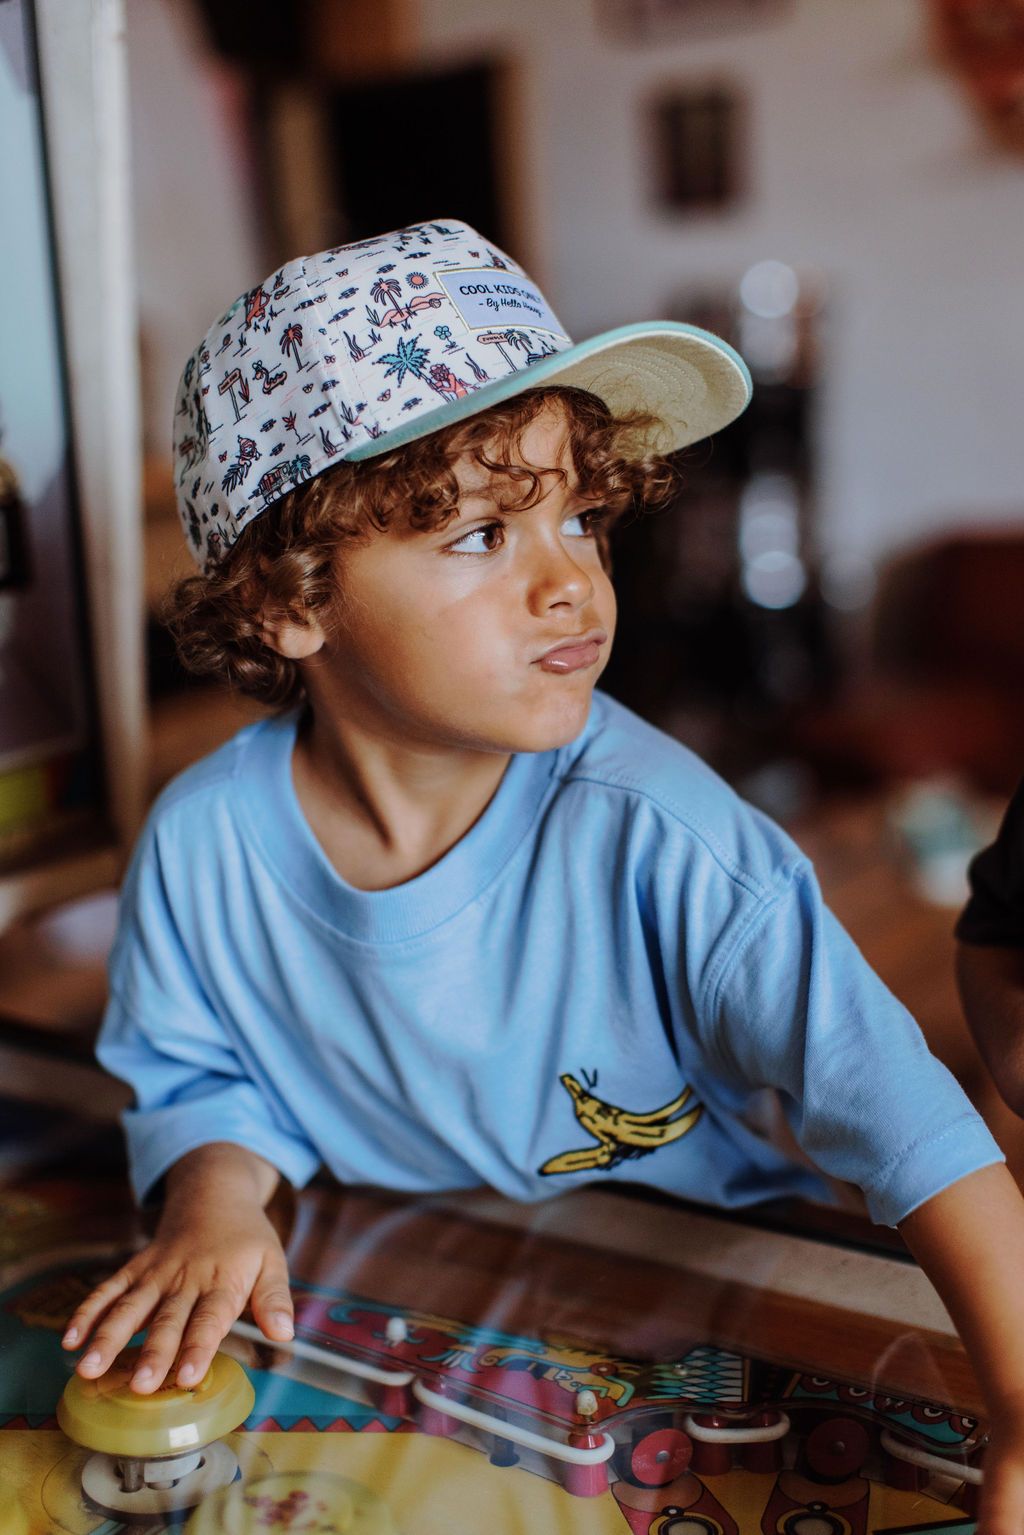 Casquette Jungly 2-5 ans - Cool kids Only - Hello Hossy